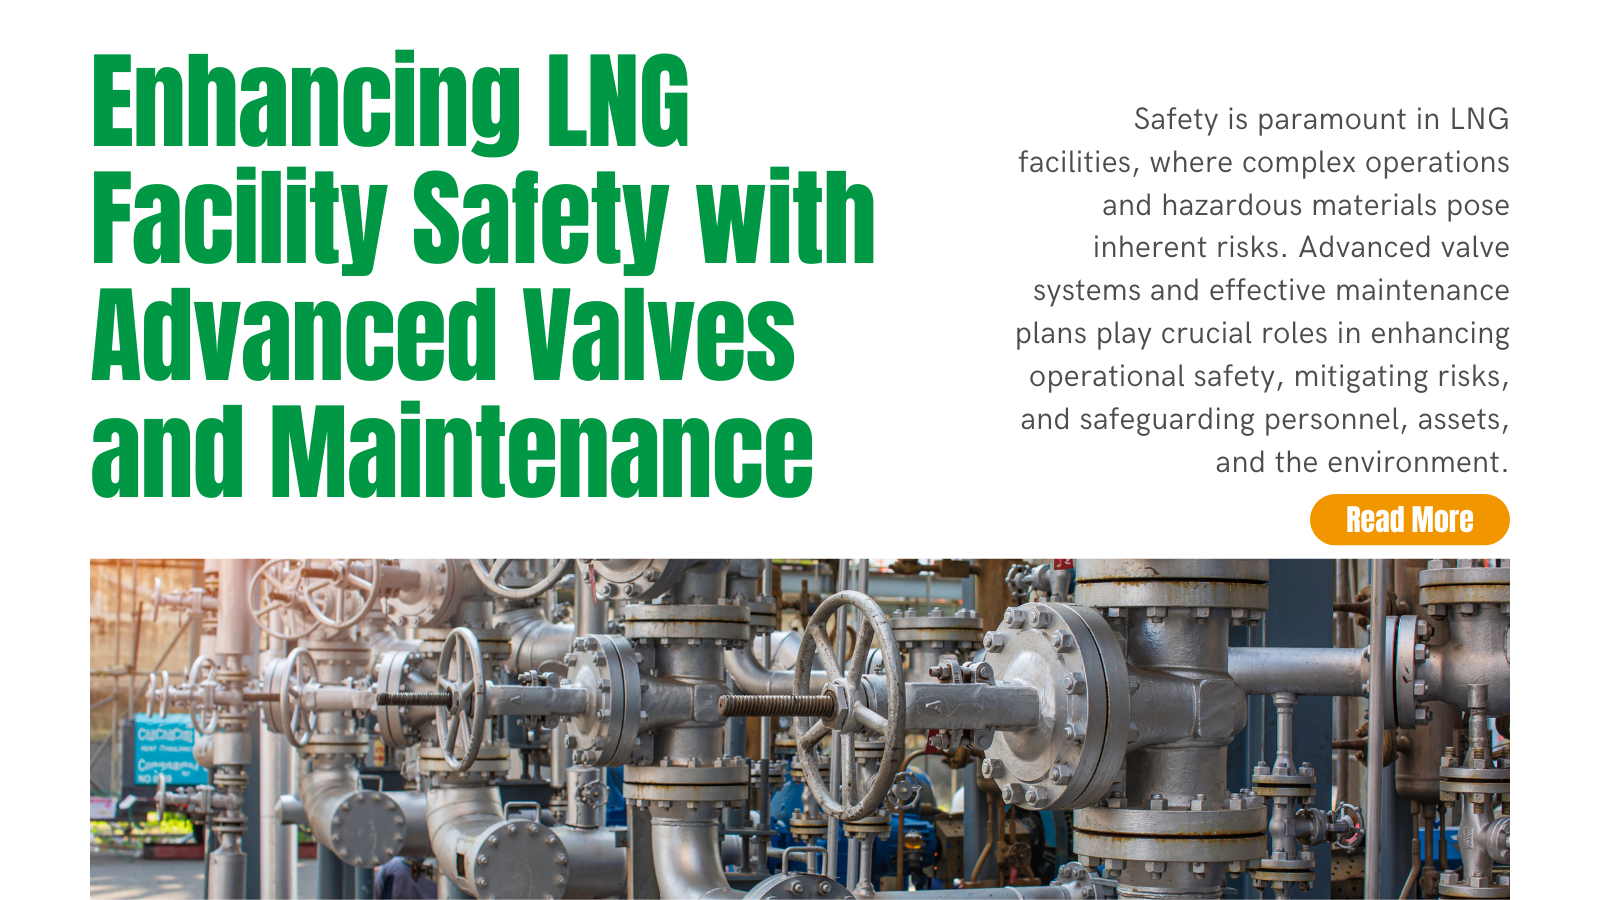 Safety First: Enhancing Operational Safety in LNG Facilities Through Advanced Valve Systems and Effective Maintenance | INOX-TEK